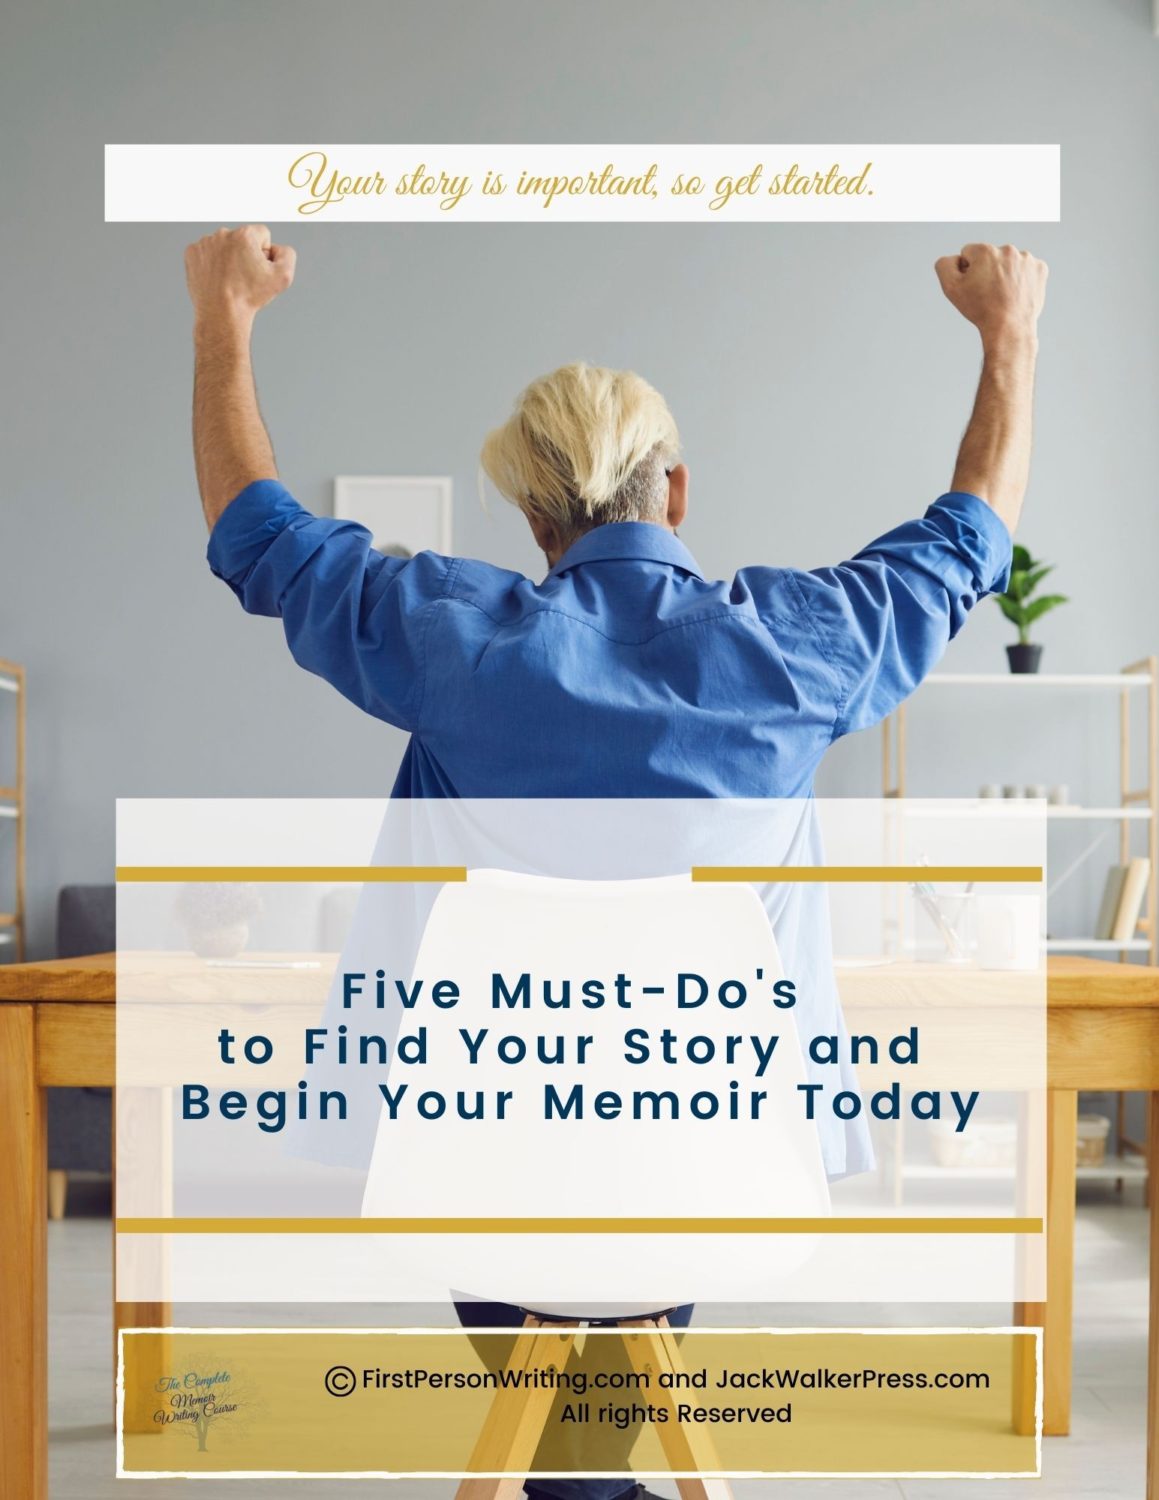 5 Must-Do's to find your story and write your Memoir today